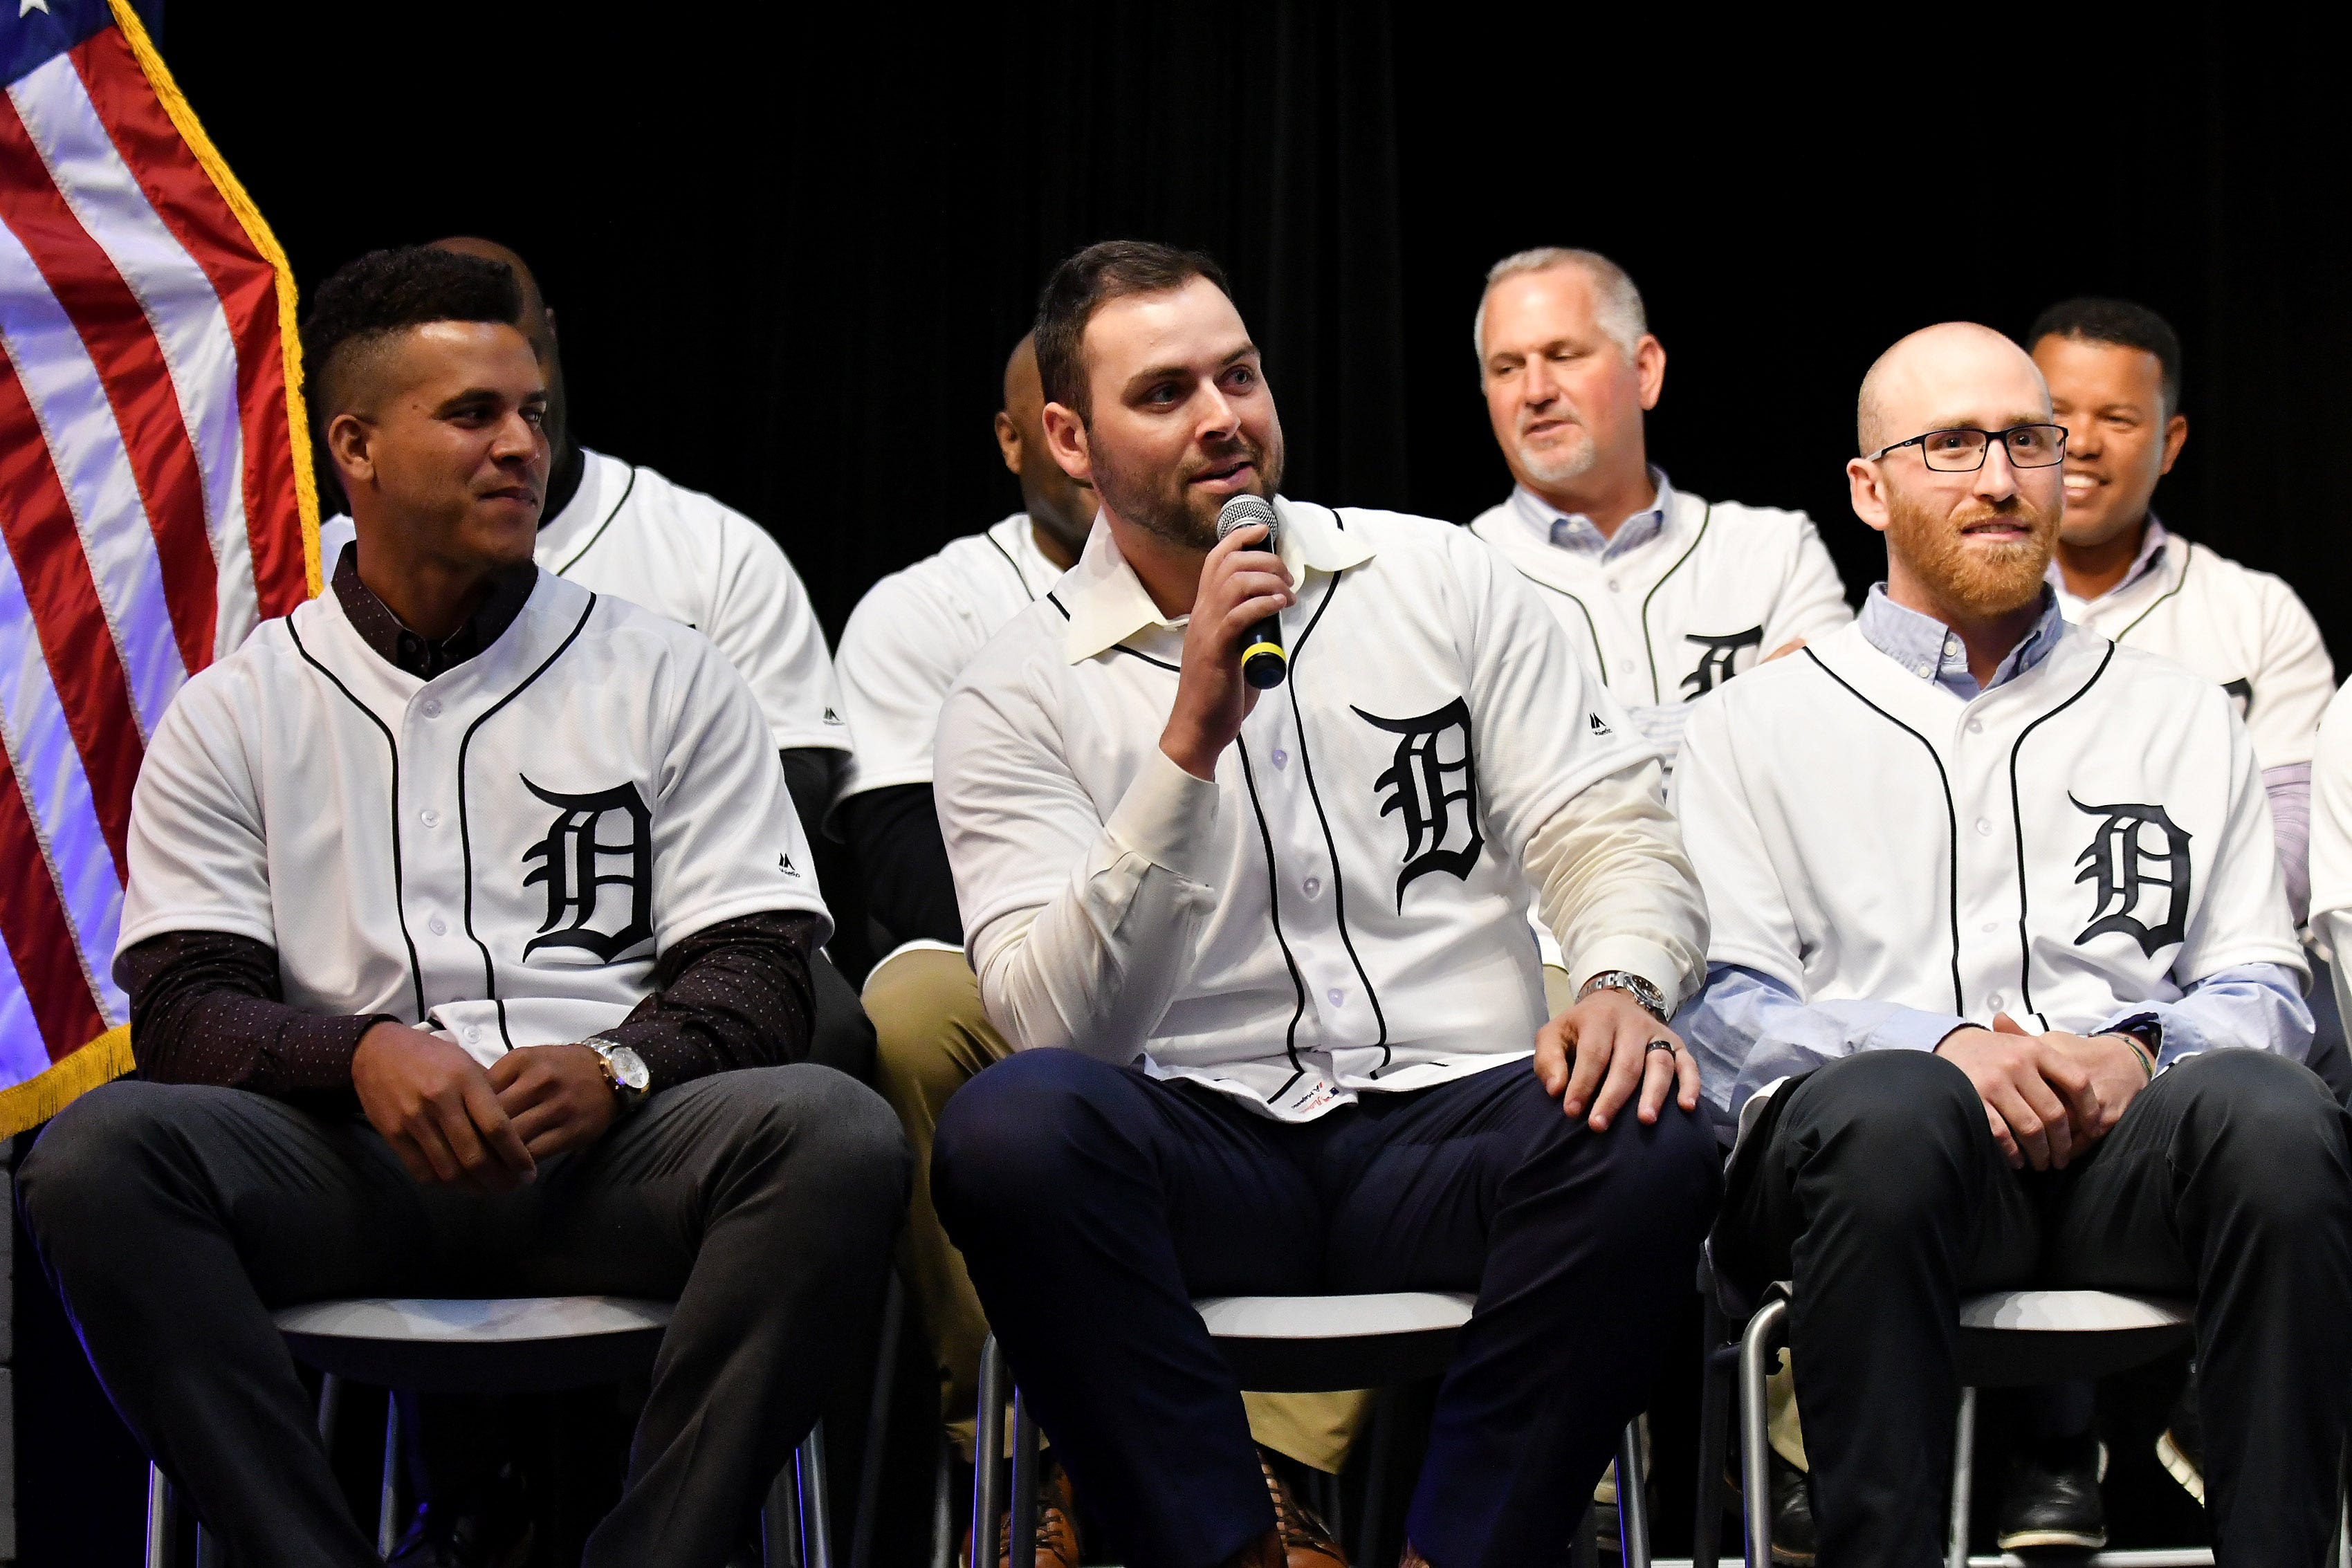 Tigers pitcher Michael Fulmer, center, answers a question and talks about doing some part-time plumbing in the offseason at the Novi Civic Center. Jose Fernandez is at left and Reed Garrett, right.